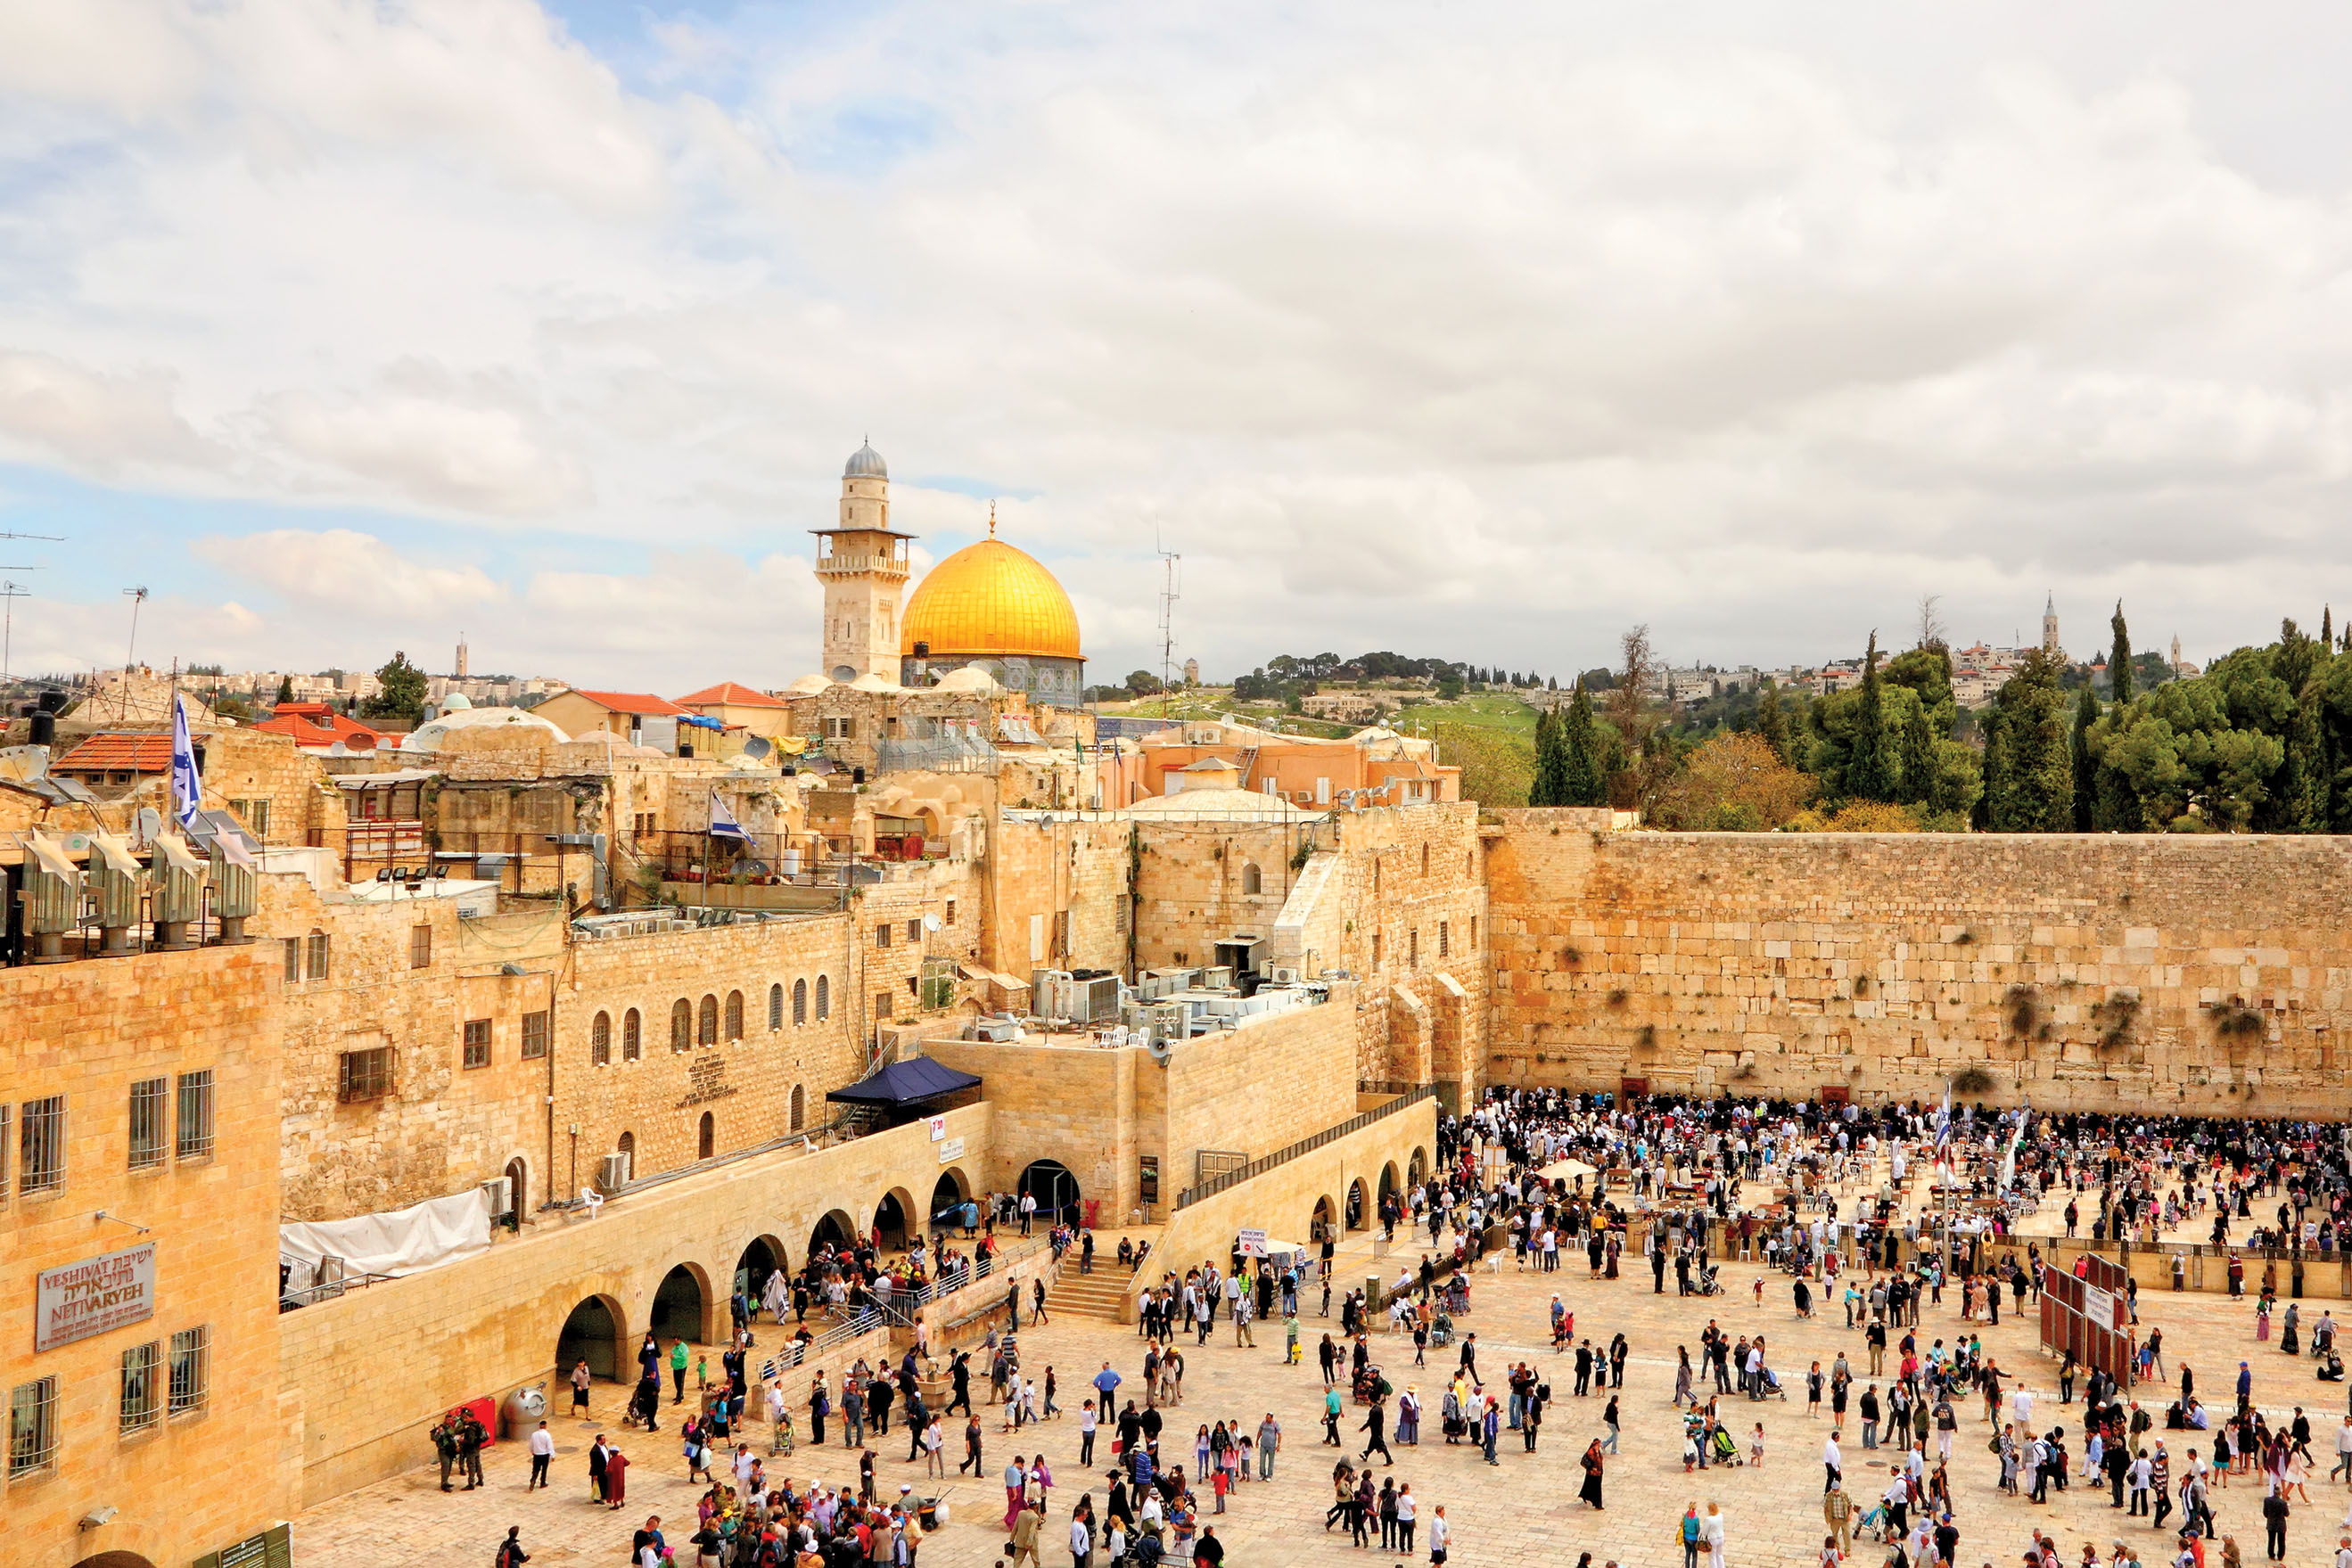 The Western Wall and Temple Mount complex